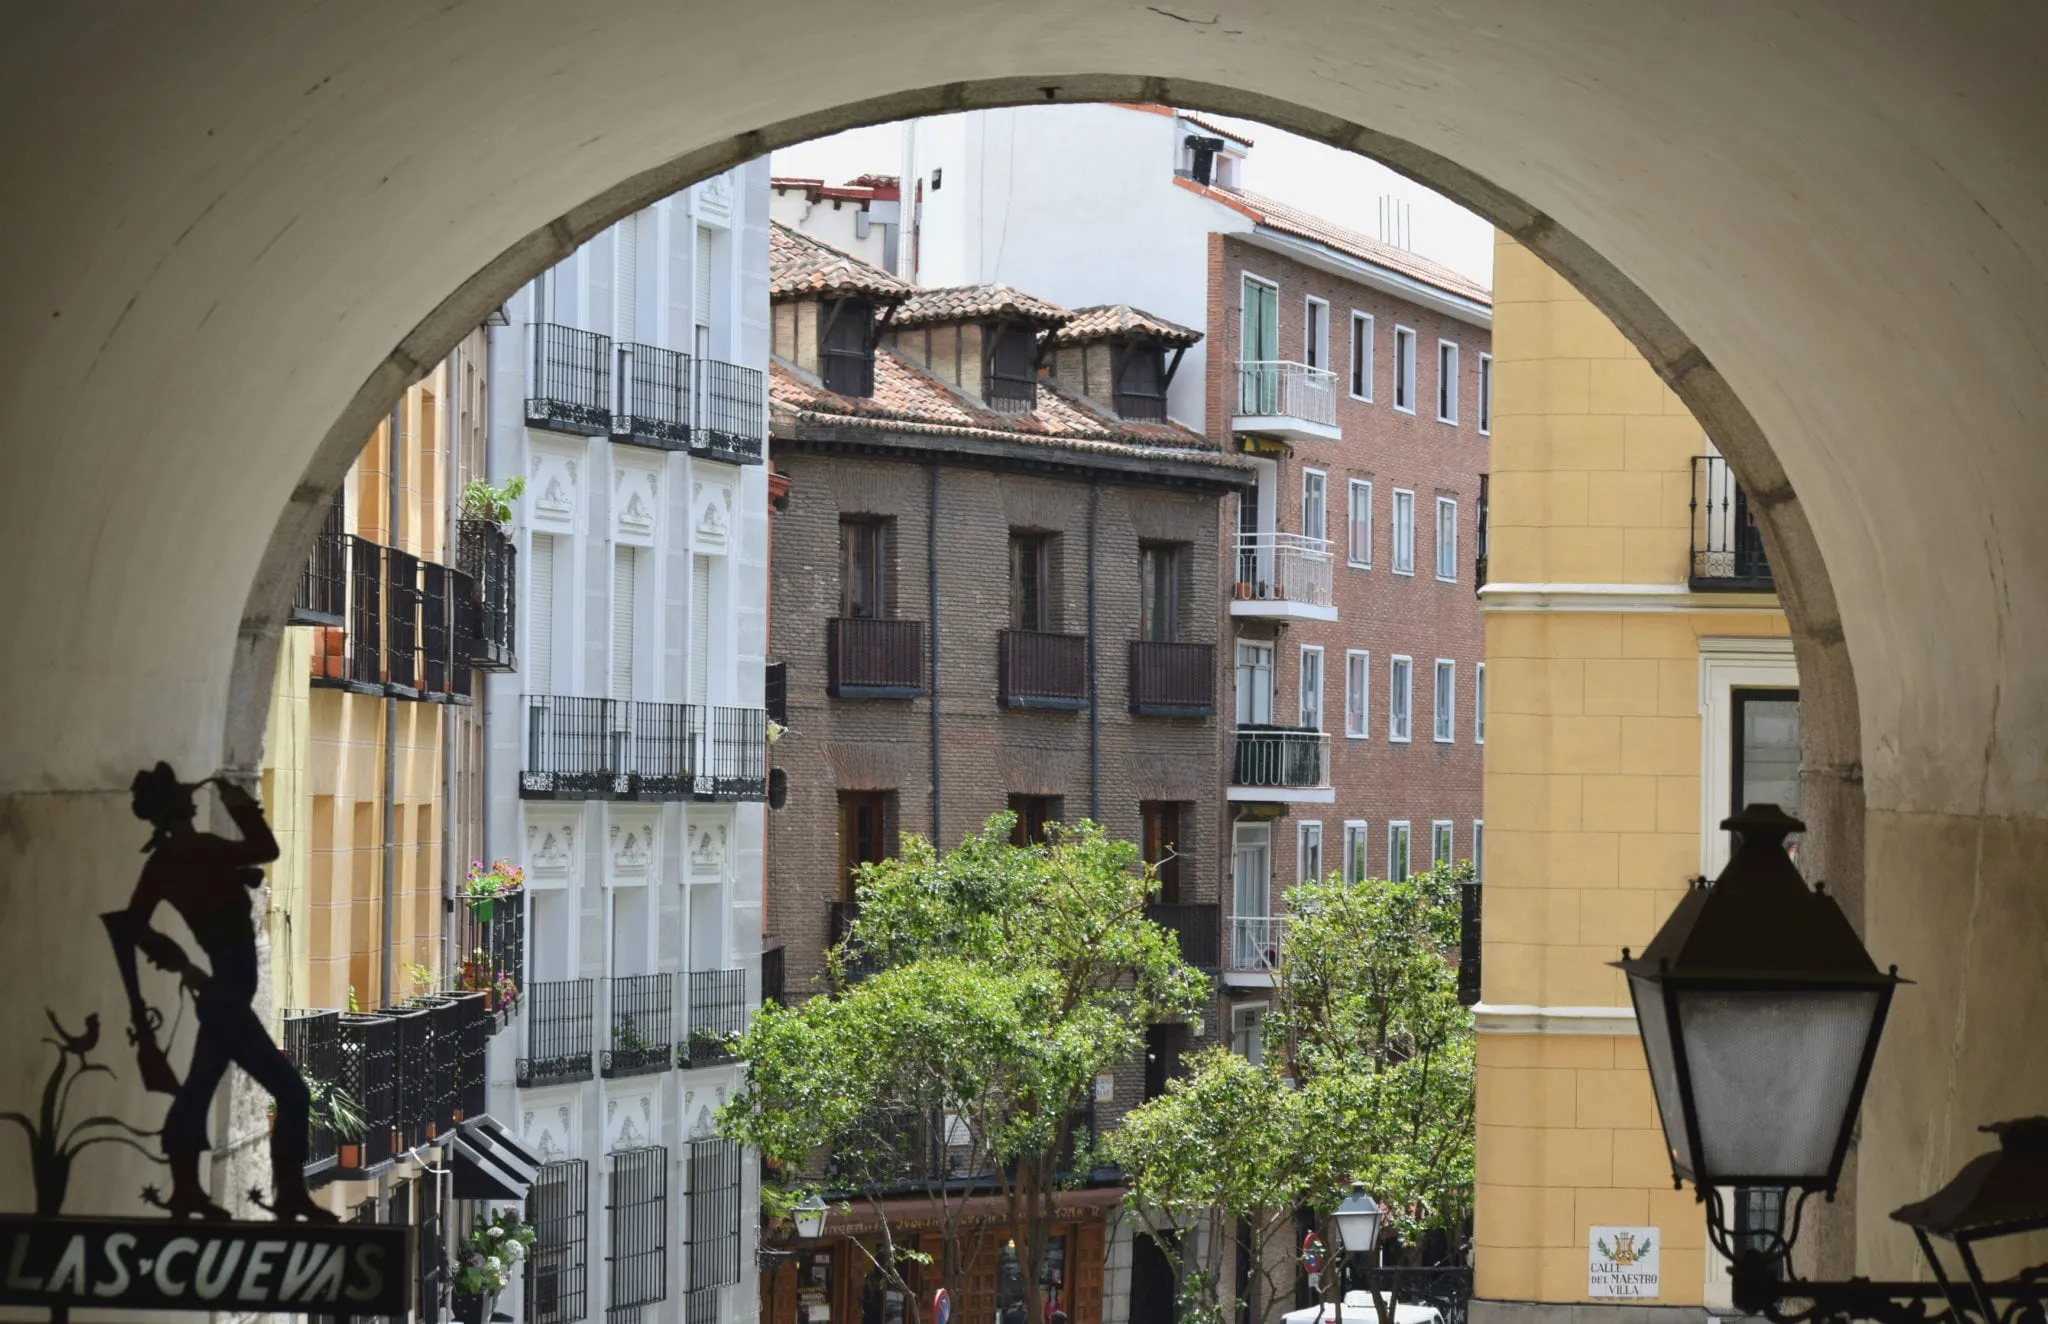 Photo of an arch in Madrid Spain with colorful buildings visible in the background. views like this are a free way to enjoy madrid on a budget